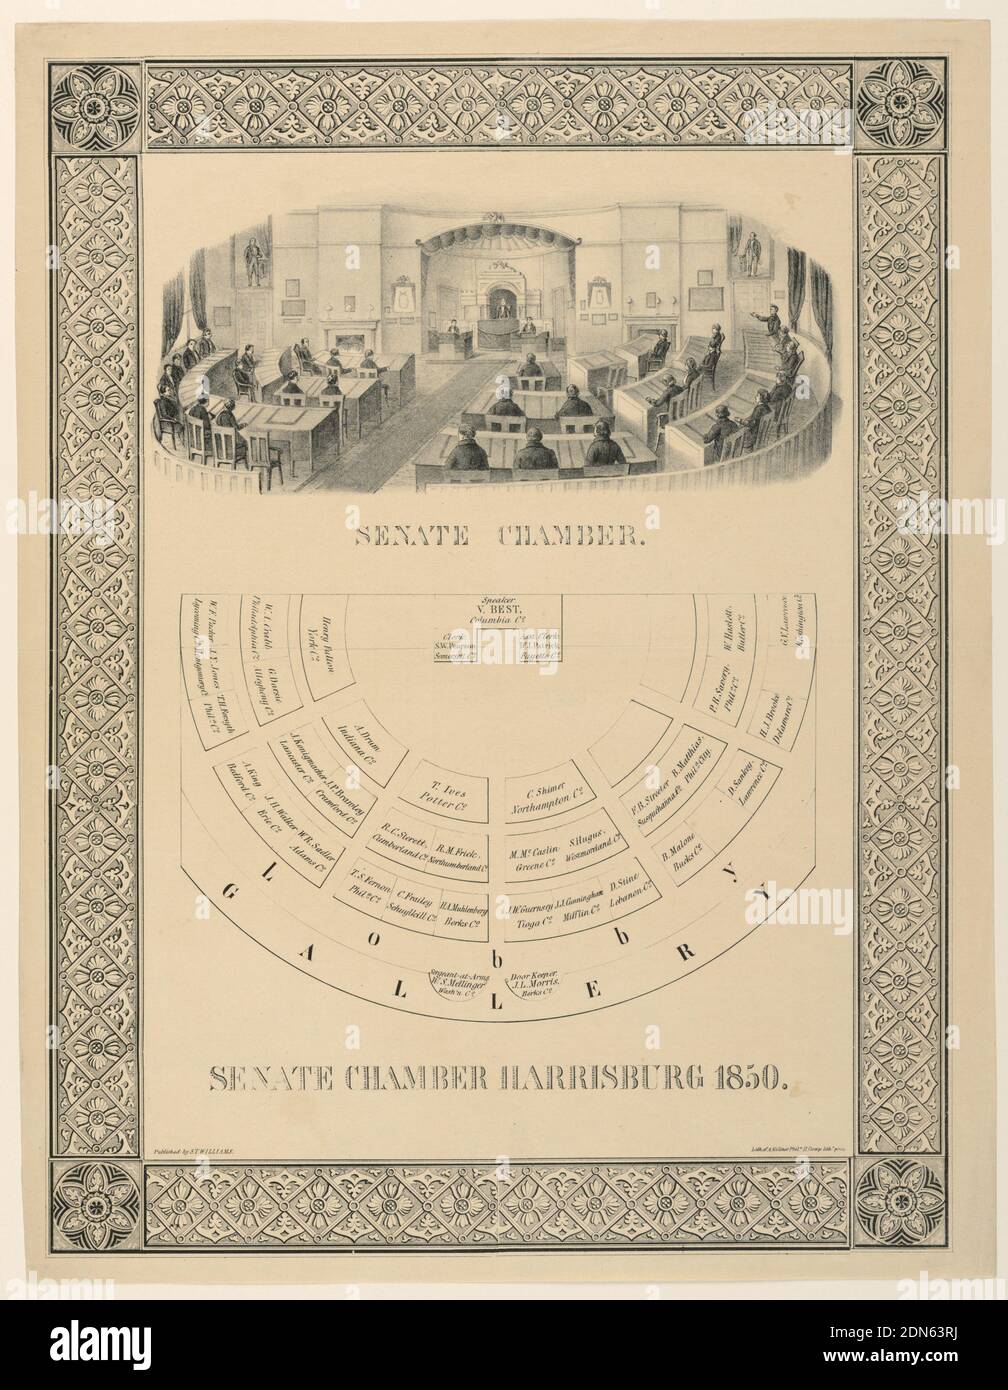 Senate Chamber, Harrisbug, Pennsylvannia, August Kollner, 1813–1850, S. T. Williams, Lithograph with black ink on paper, Vertical rectangle. Vignette of Senate Chamber interior, looking toward the Speaker's podium. Below: plan of the chamber, with names of members indicated. Caption: 'Senate Chamber Harrisburg 1850.' Enclosed in ornamental frame. Lower left: 'Pubished by S.T. Williams.' Lower right: Lith. of A. Kollner Phile H. Camp litho press.', USA, 1850, interiors, Print Stock Photo